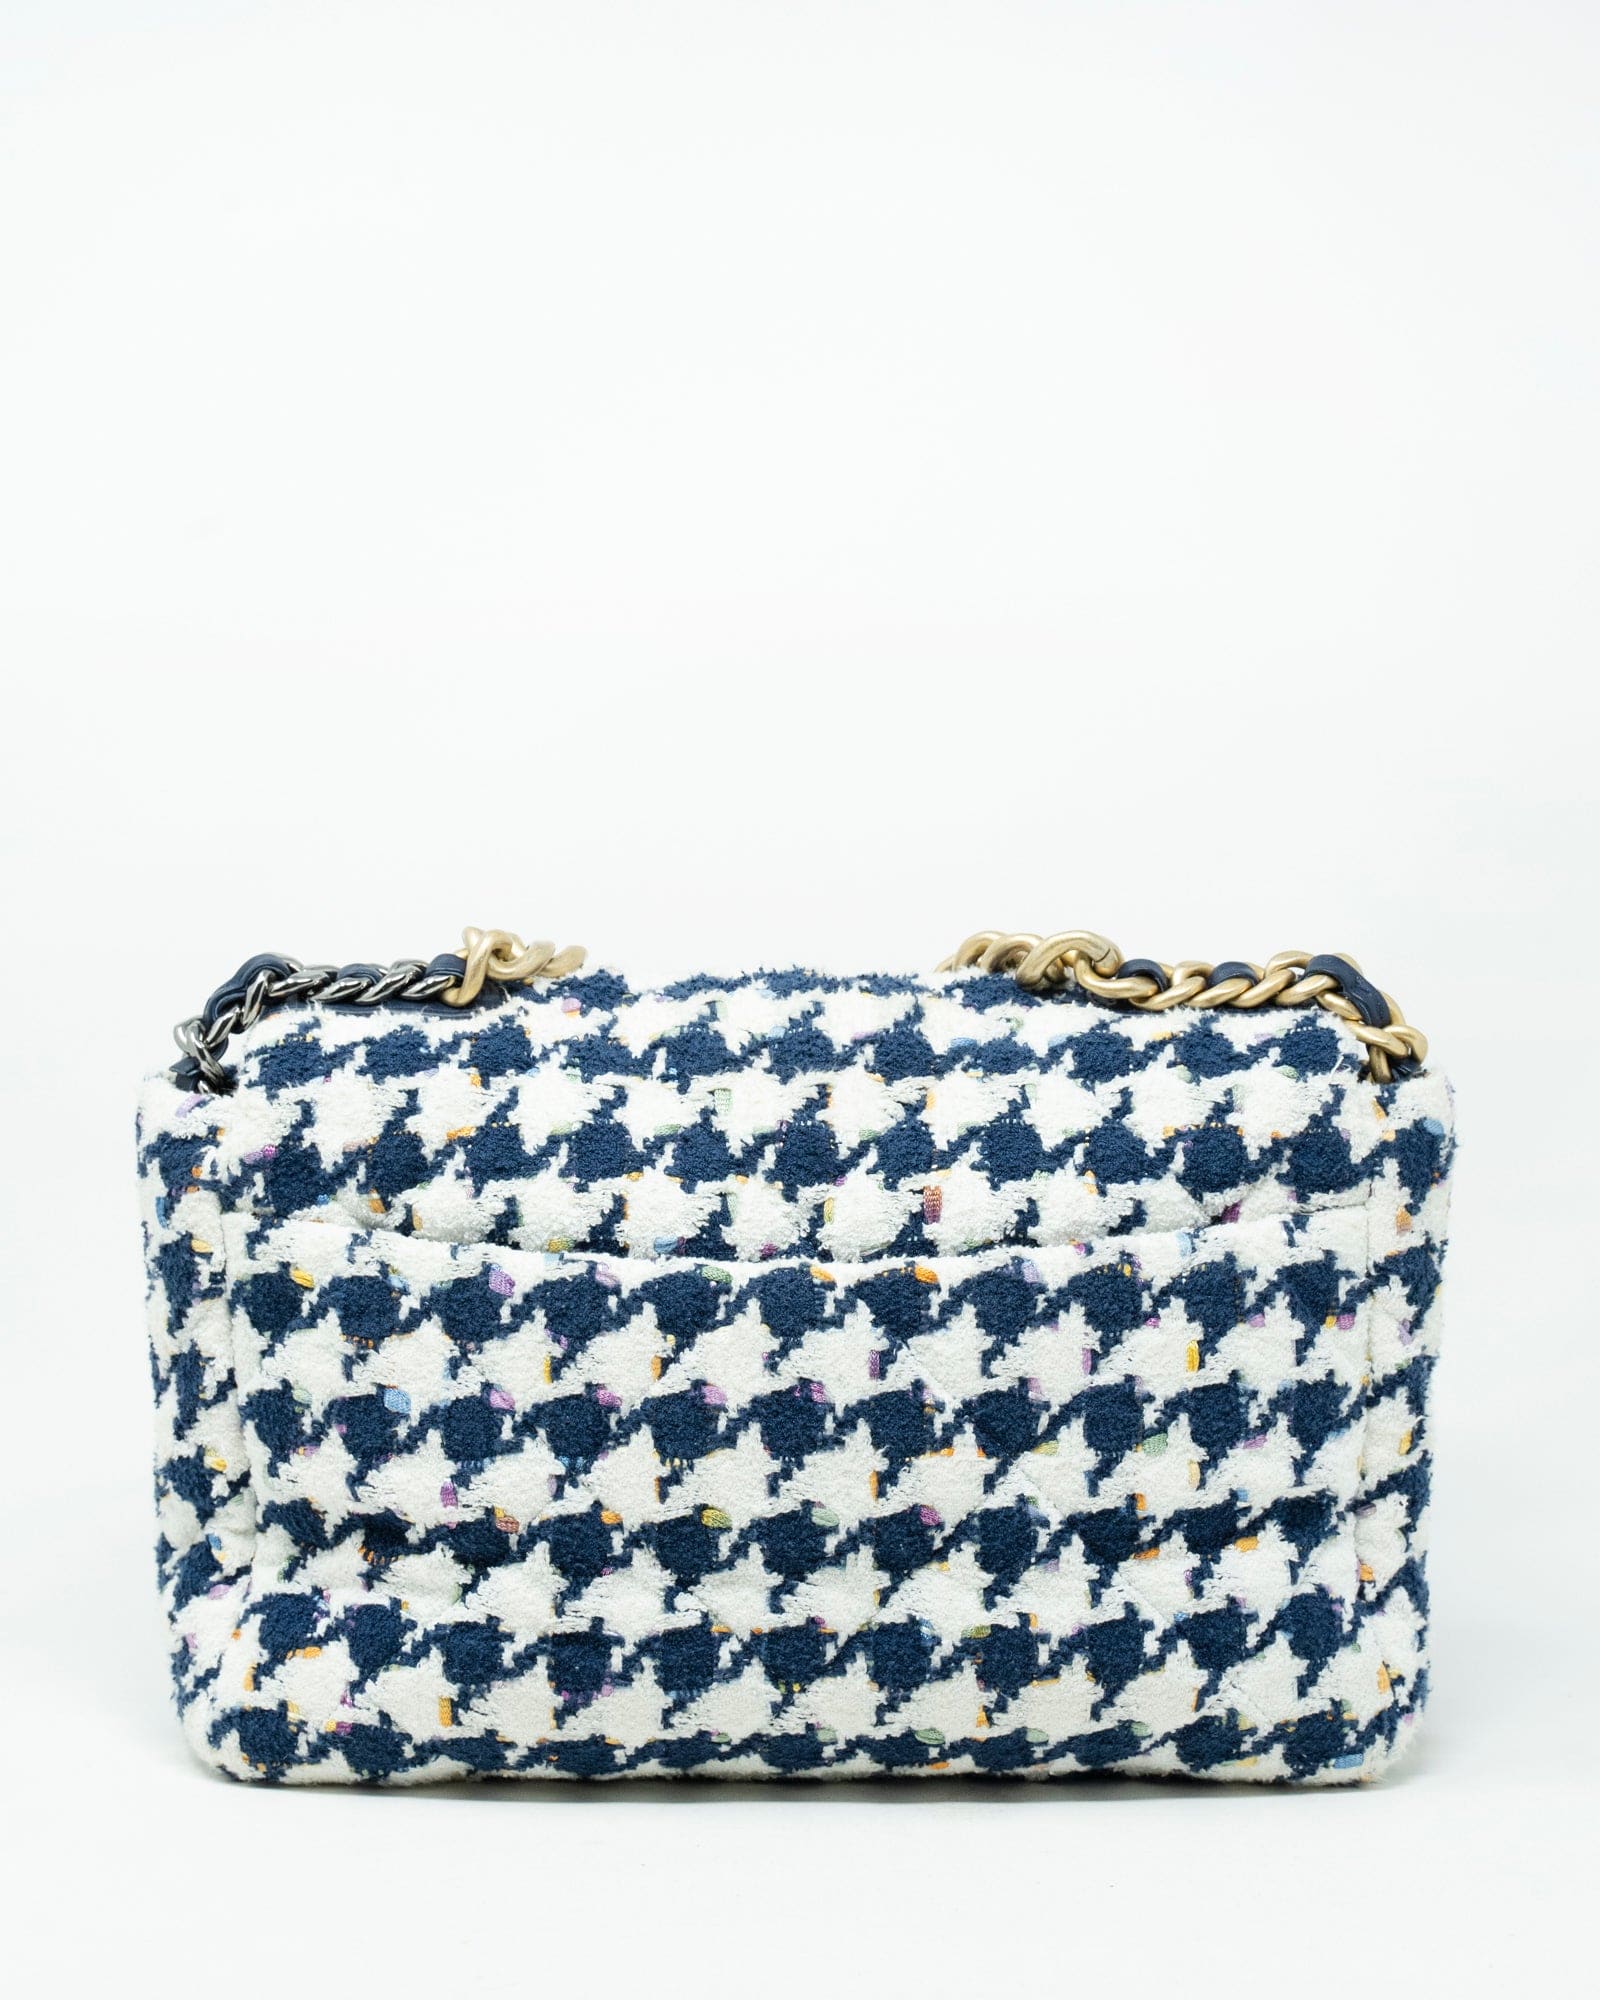 Chanel Chanel 19 Houndtooth Navy White Flap bag RJL1344